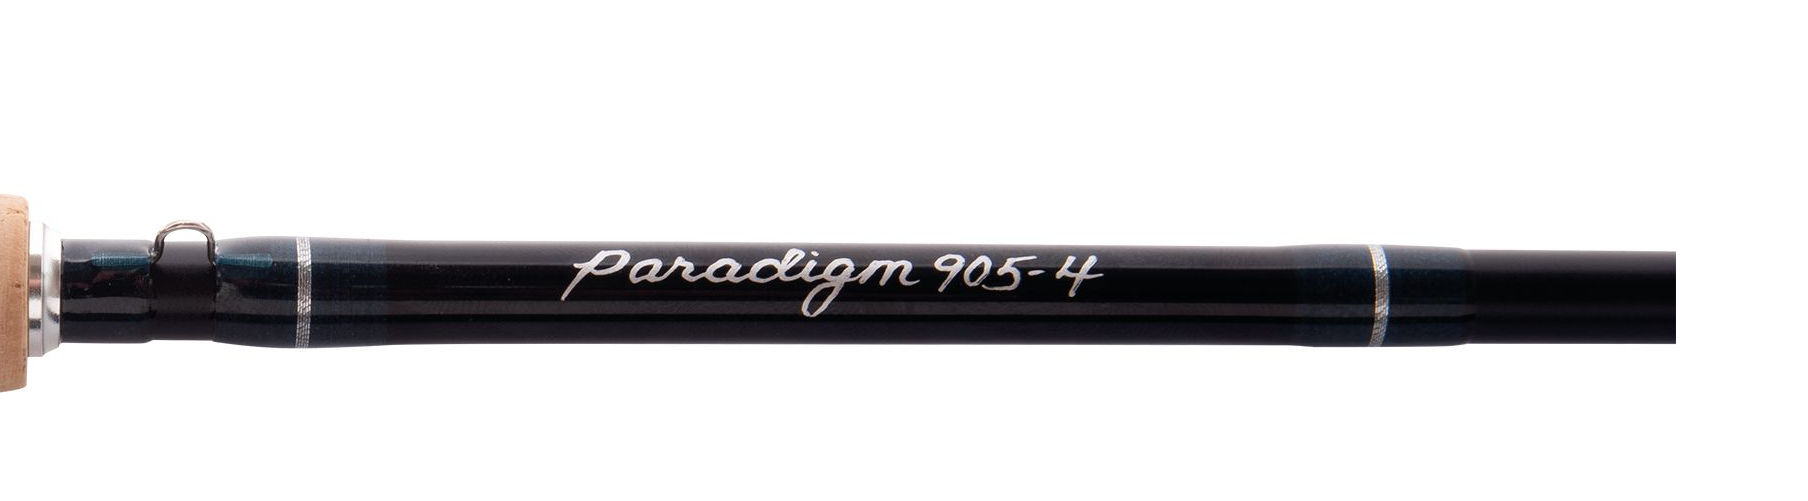 PARADIGM Fly Rods // Trout Rod from Thomas and Thomas